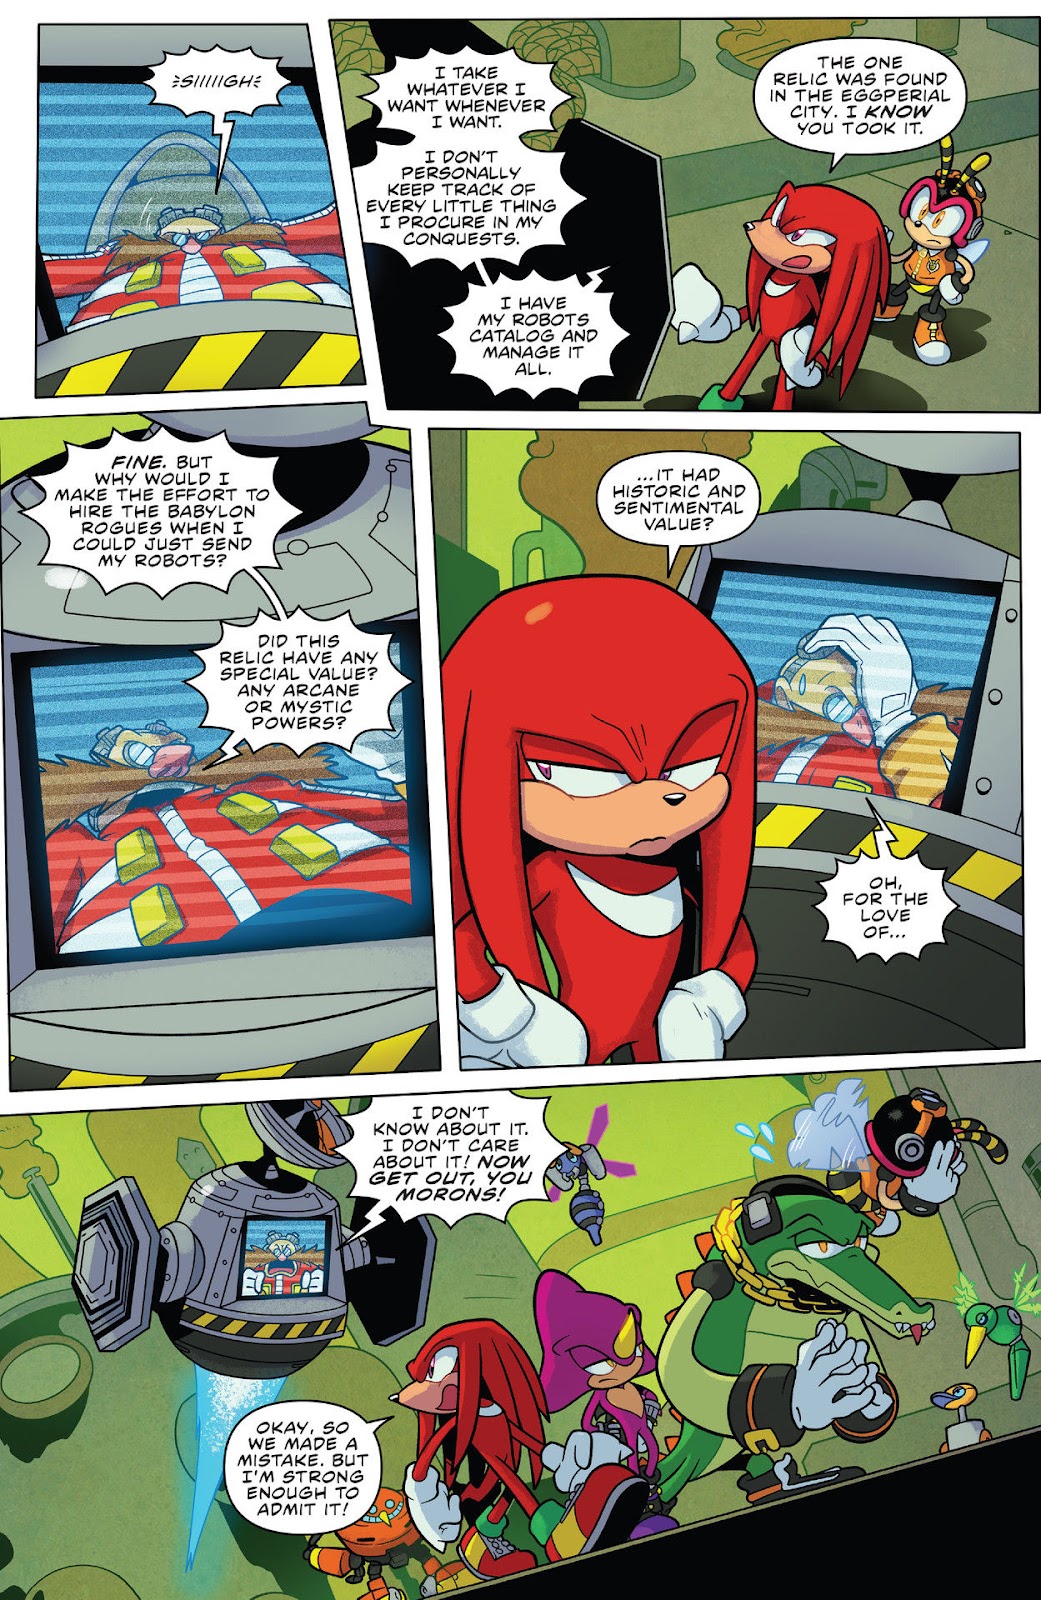 Sonic The Comic #8 Values and Pricing